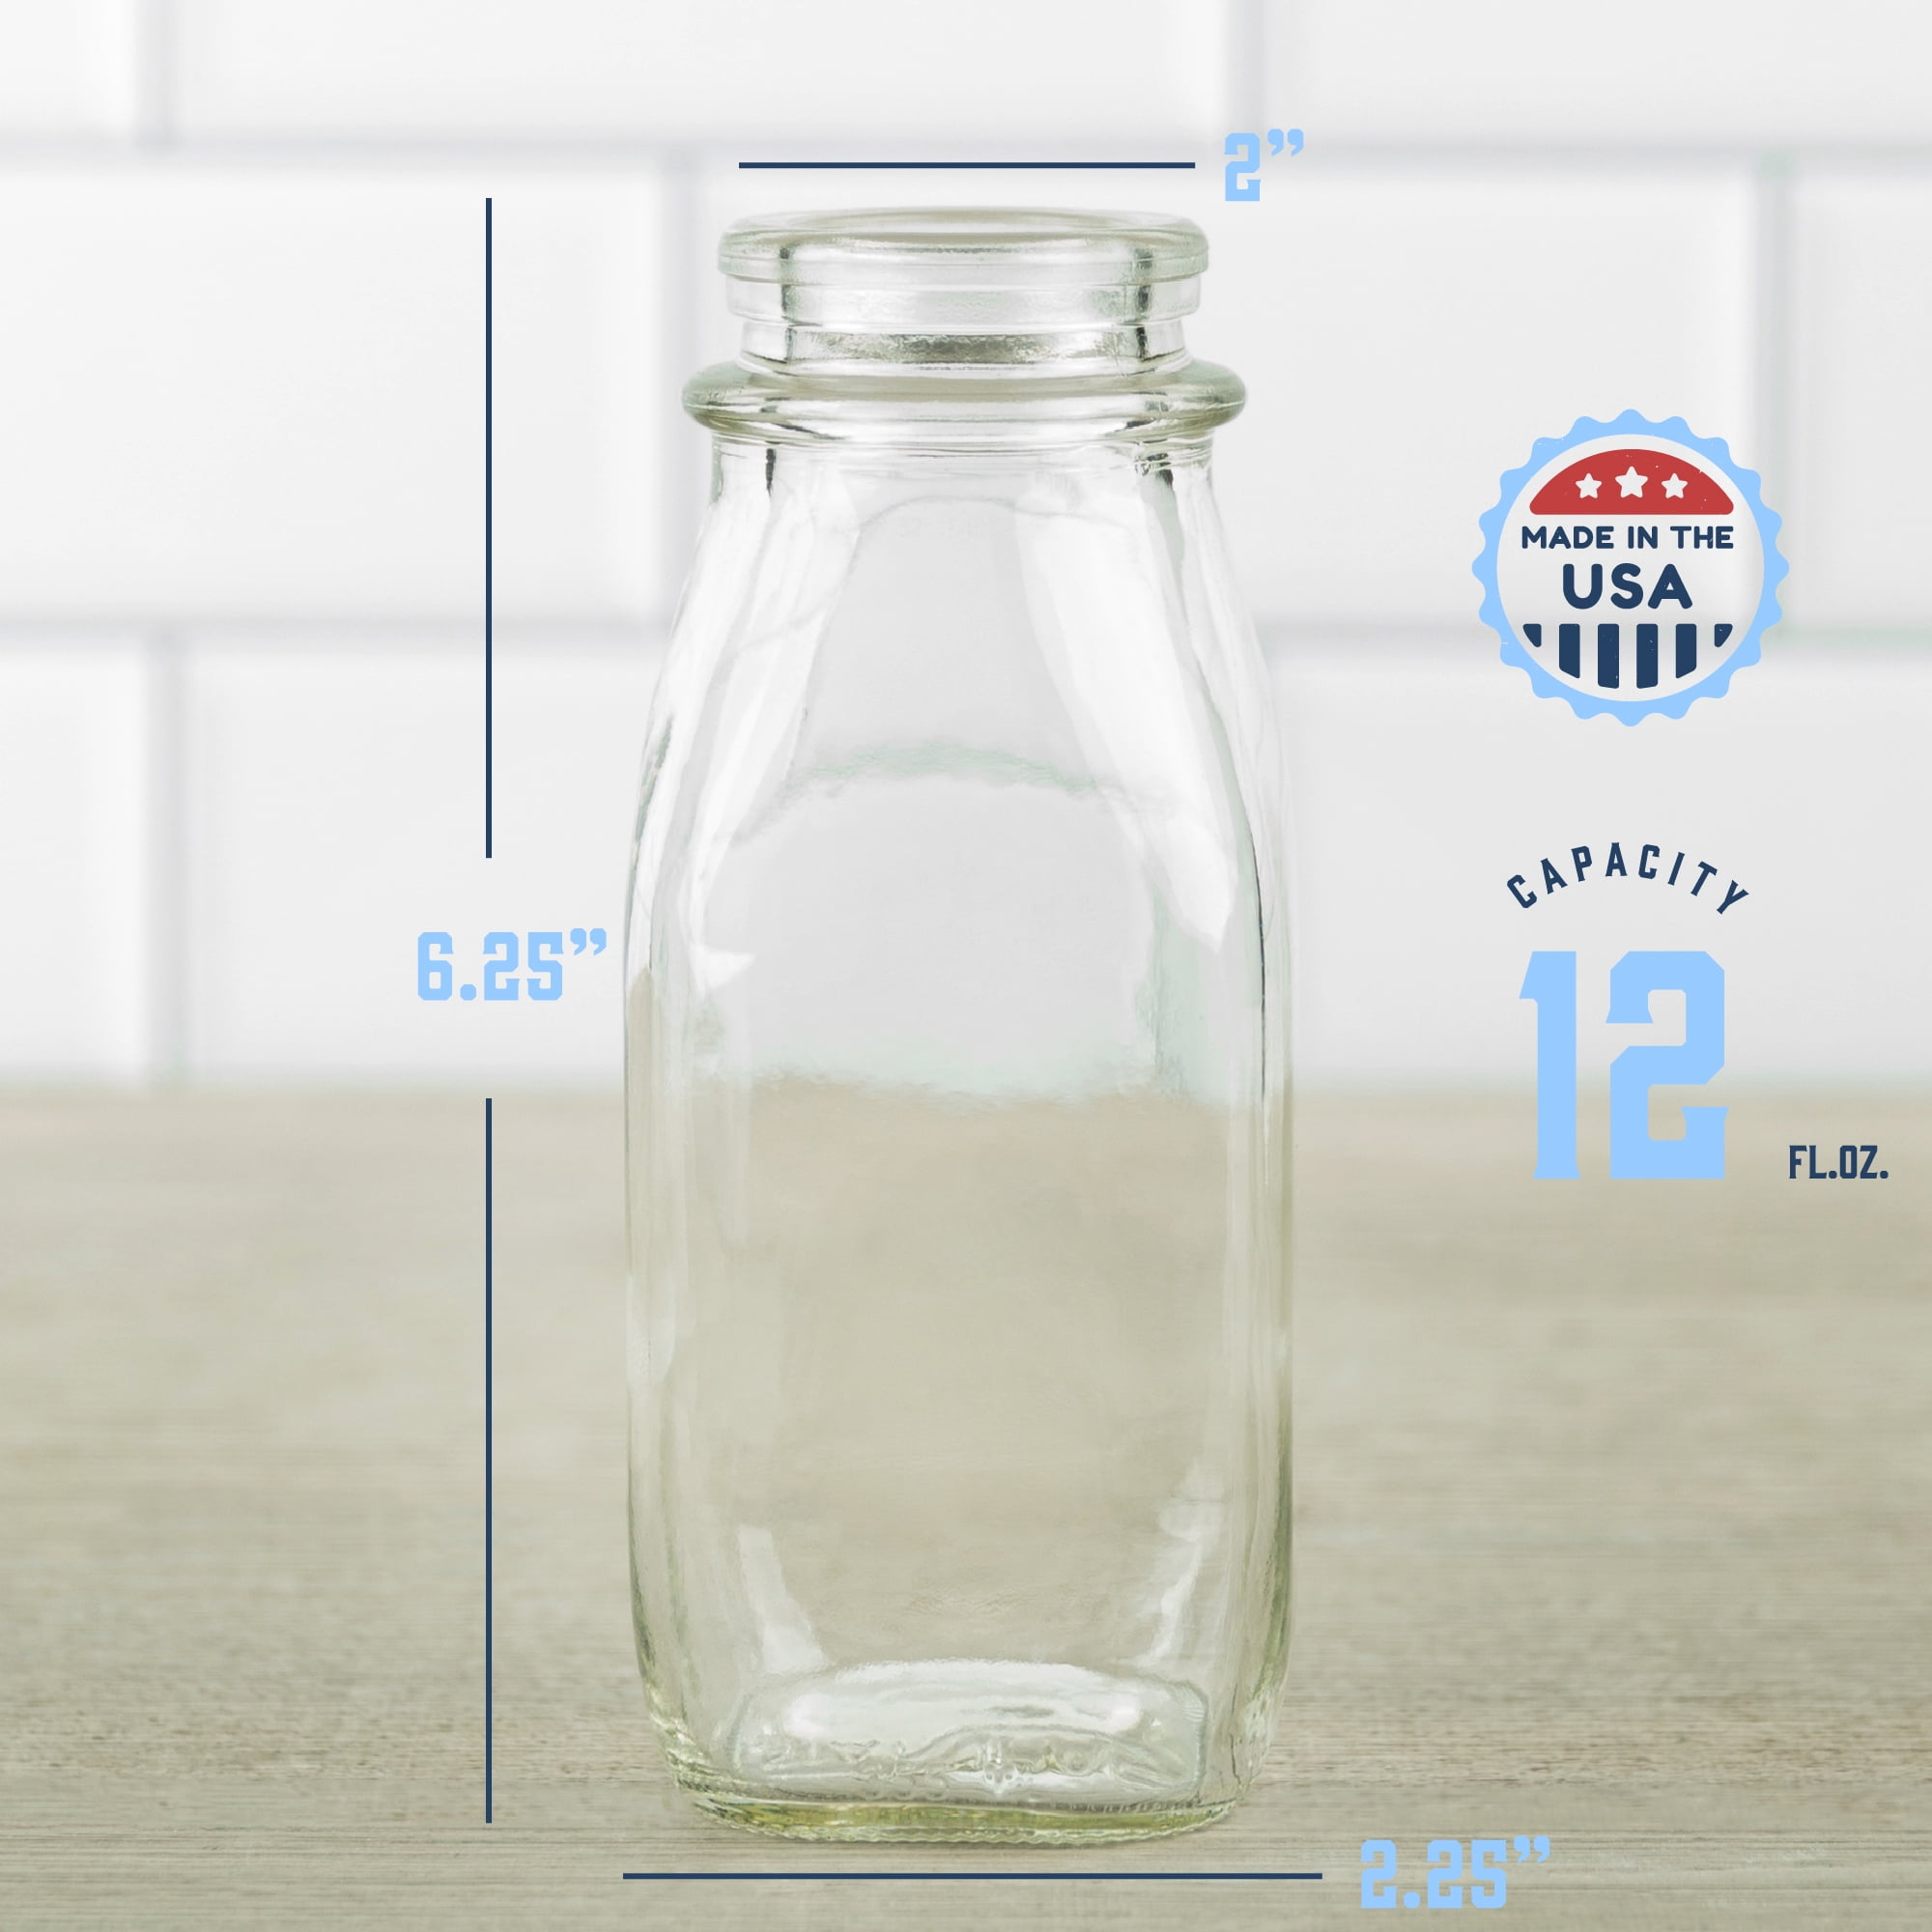 Half Gallon Glass Milk Bottle with Lid (4 Pack) 64 Oz Jugs and 8 White  Caps, Reusable Food Grade Mil…See more Half Gallon Glass Milk Bottle with  Lid